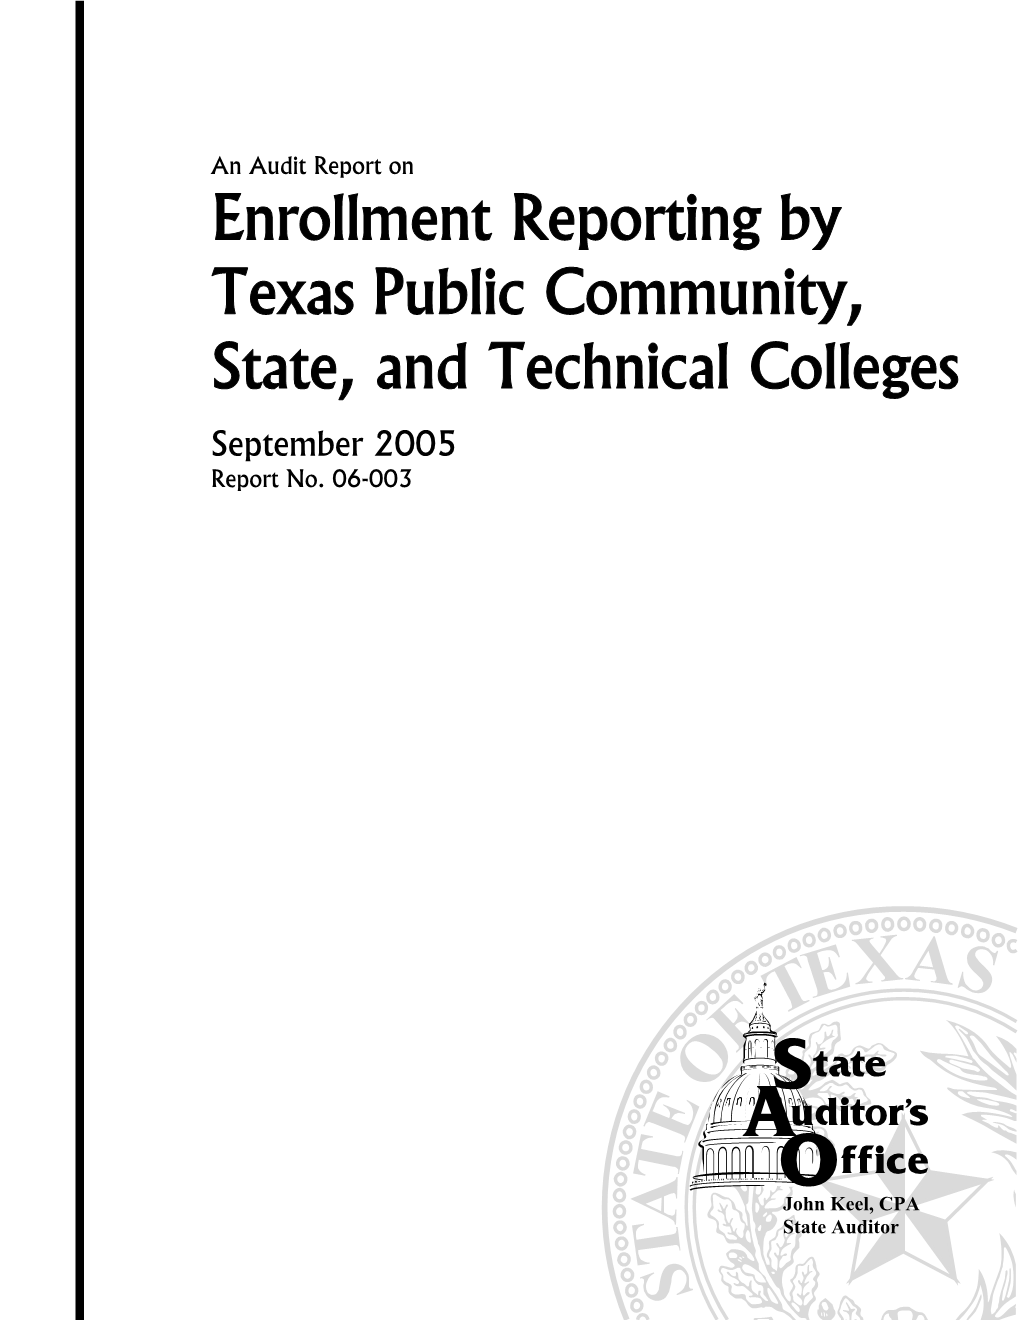 An Audit Report on Enrollment Reporting by Texas Public Community, State, and Technical Colleges September 2005 Report No